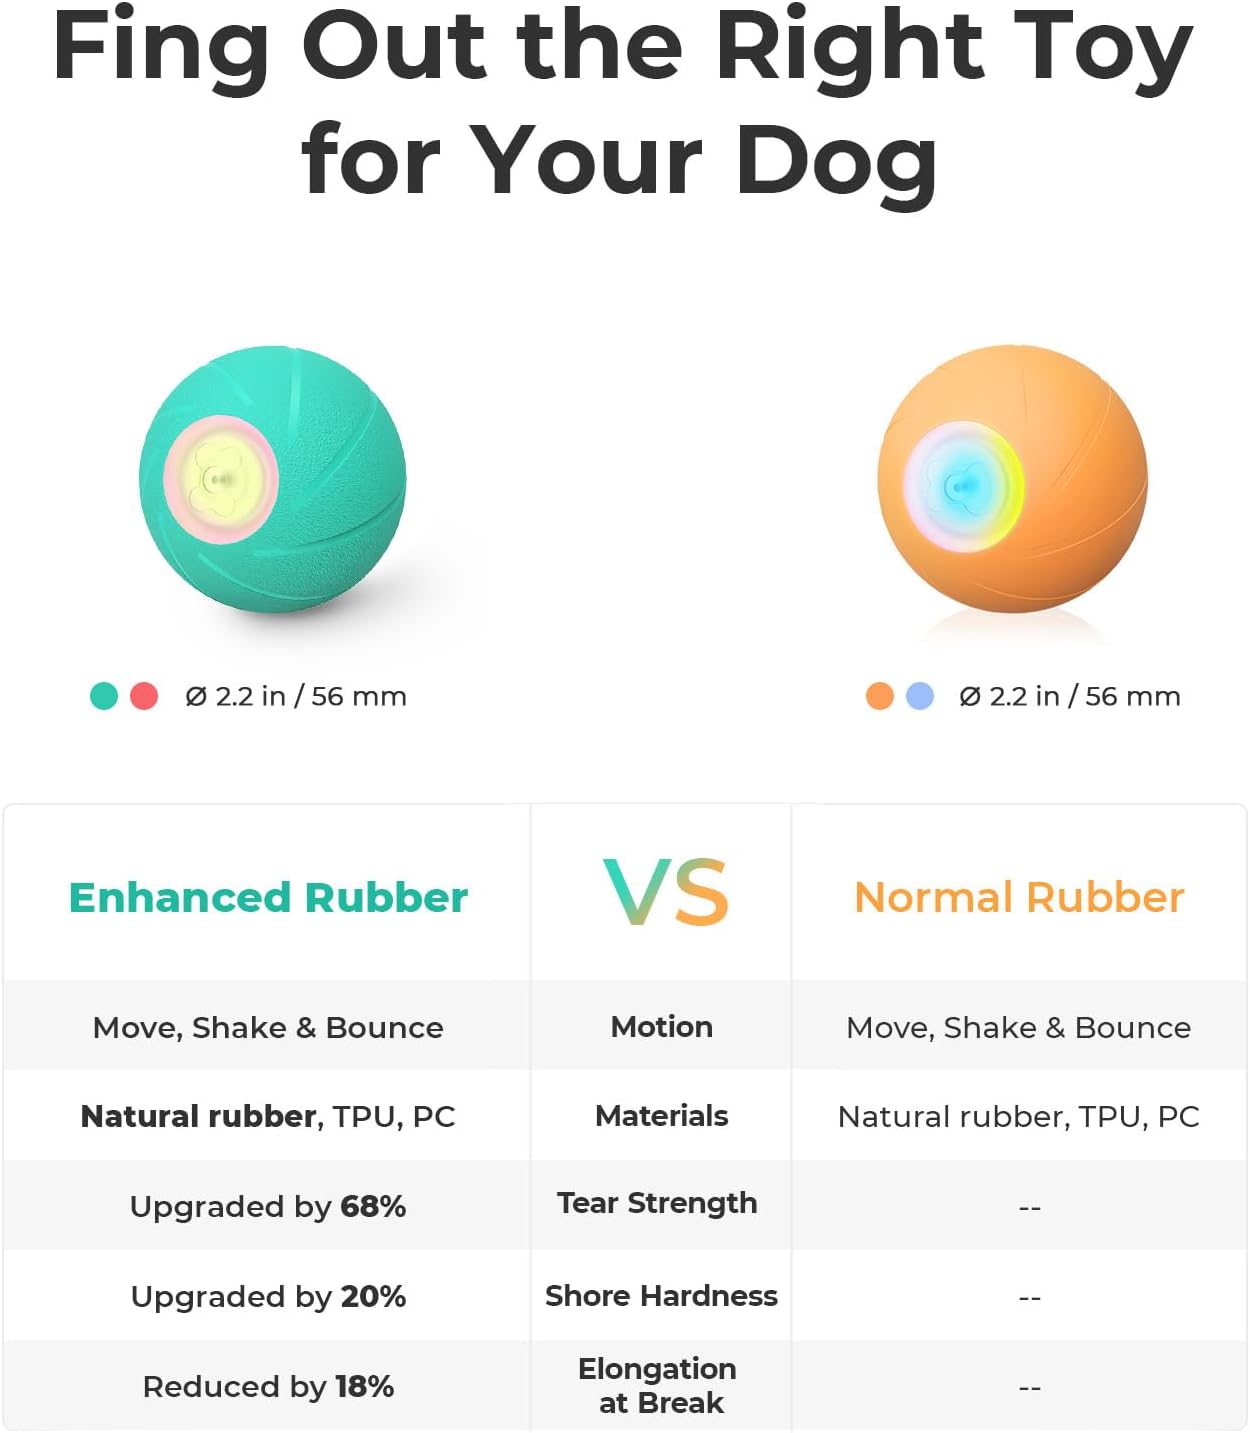 Cheerble [Enhanced Rubber Version] Intelligent Interactive Dog Toy Ball, Wicked Ball SE, 3 Interactive Modes, Active Rolling Ball for Puppy/Small Dogs with LED Lights, DC Rechargeable